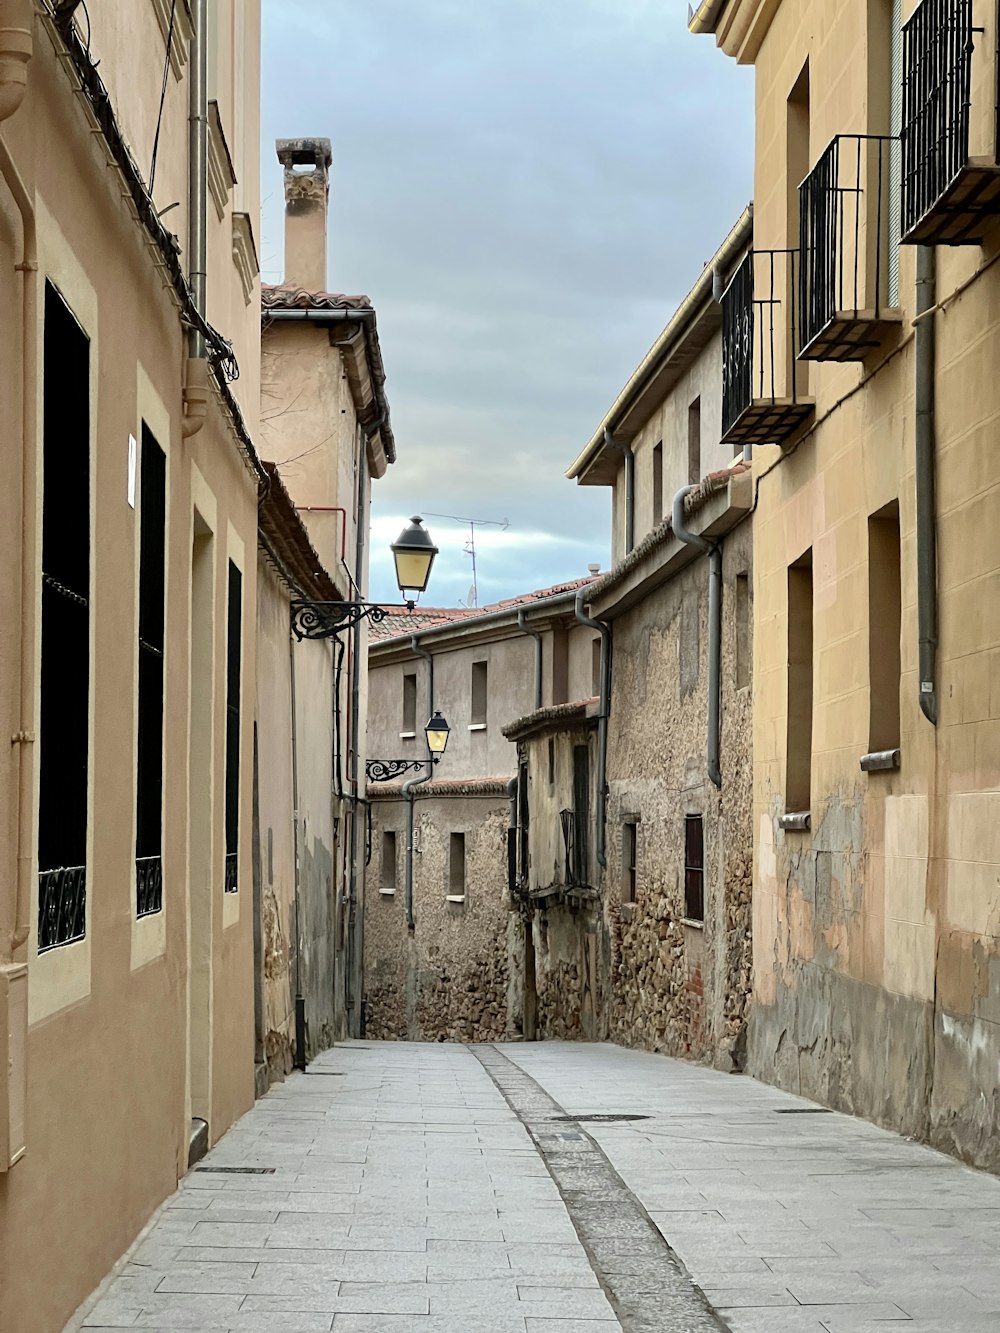 a narrow street with a lamp post in the middle of it